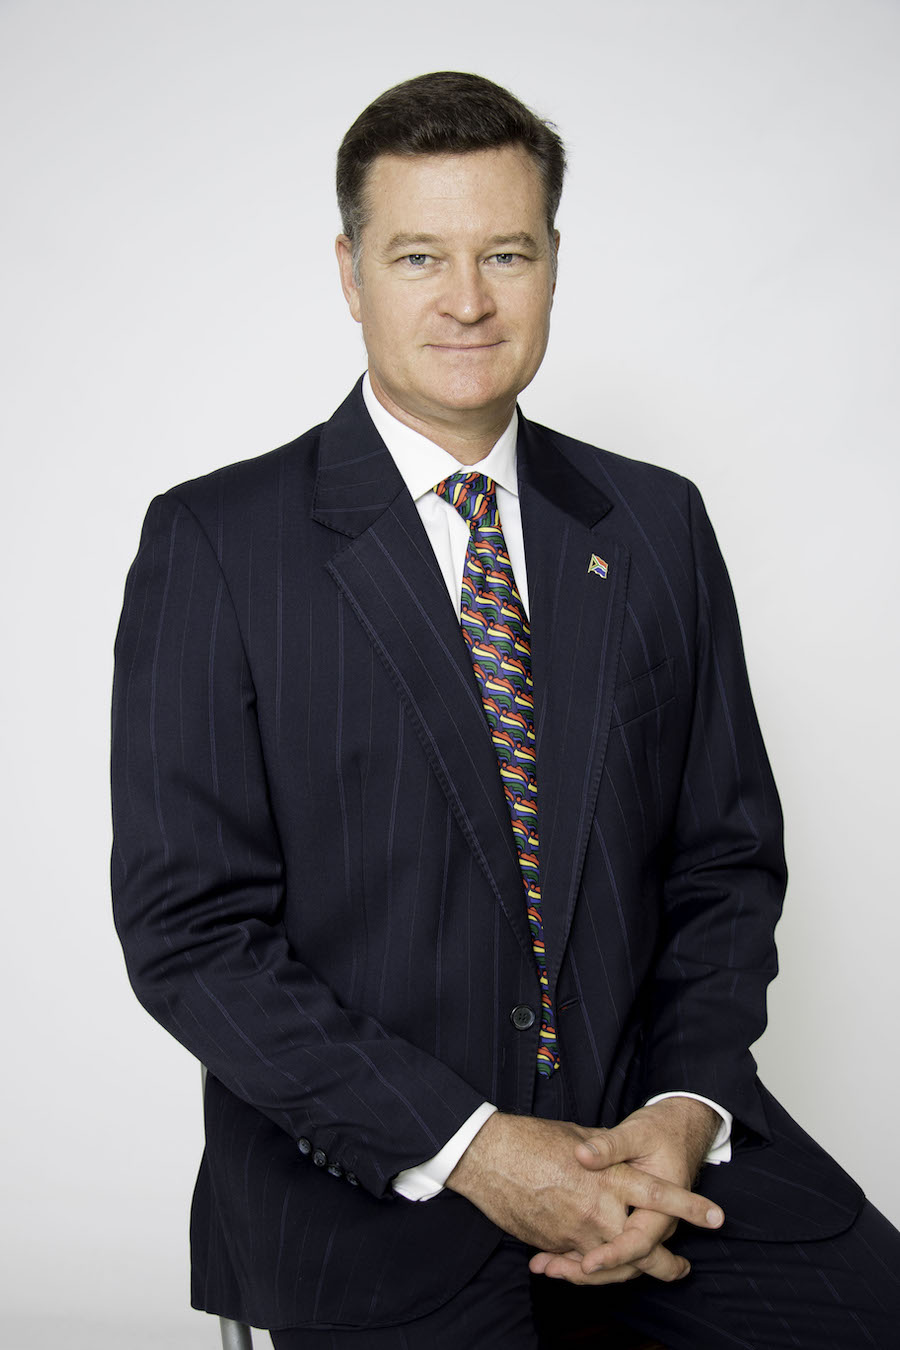 Russell Curtis, CEO of Invest Durban